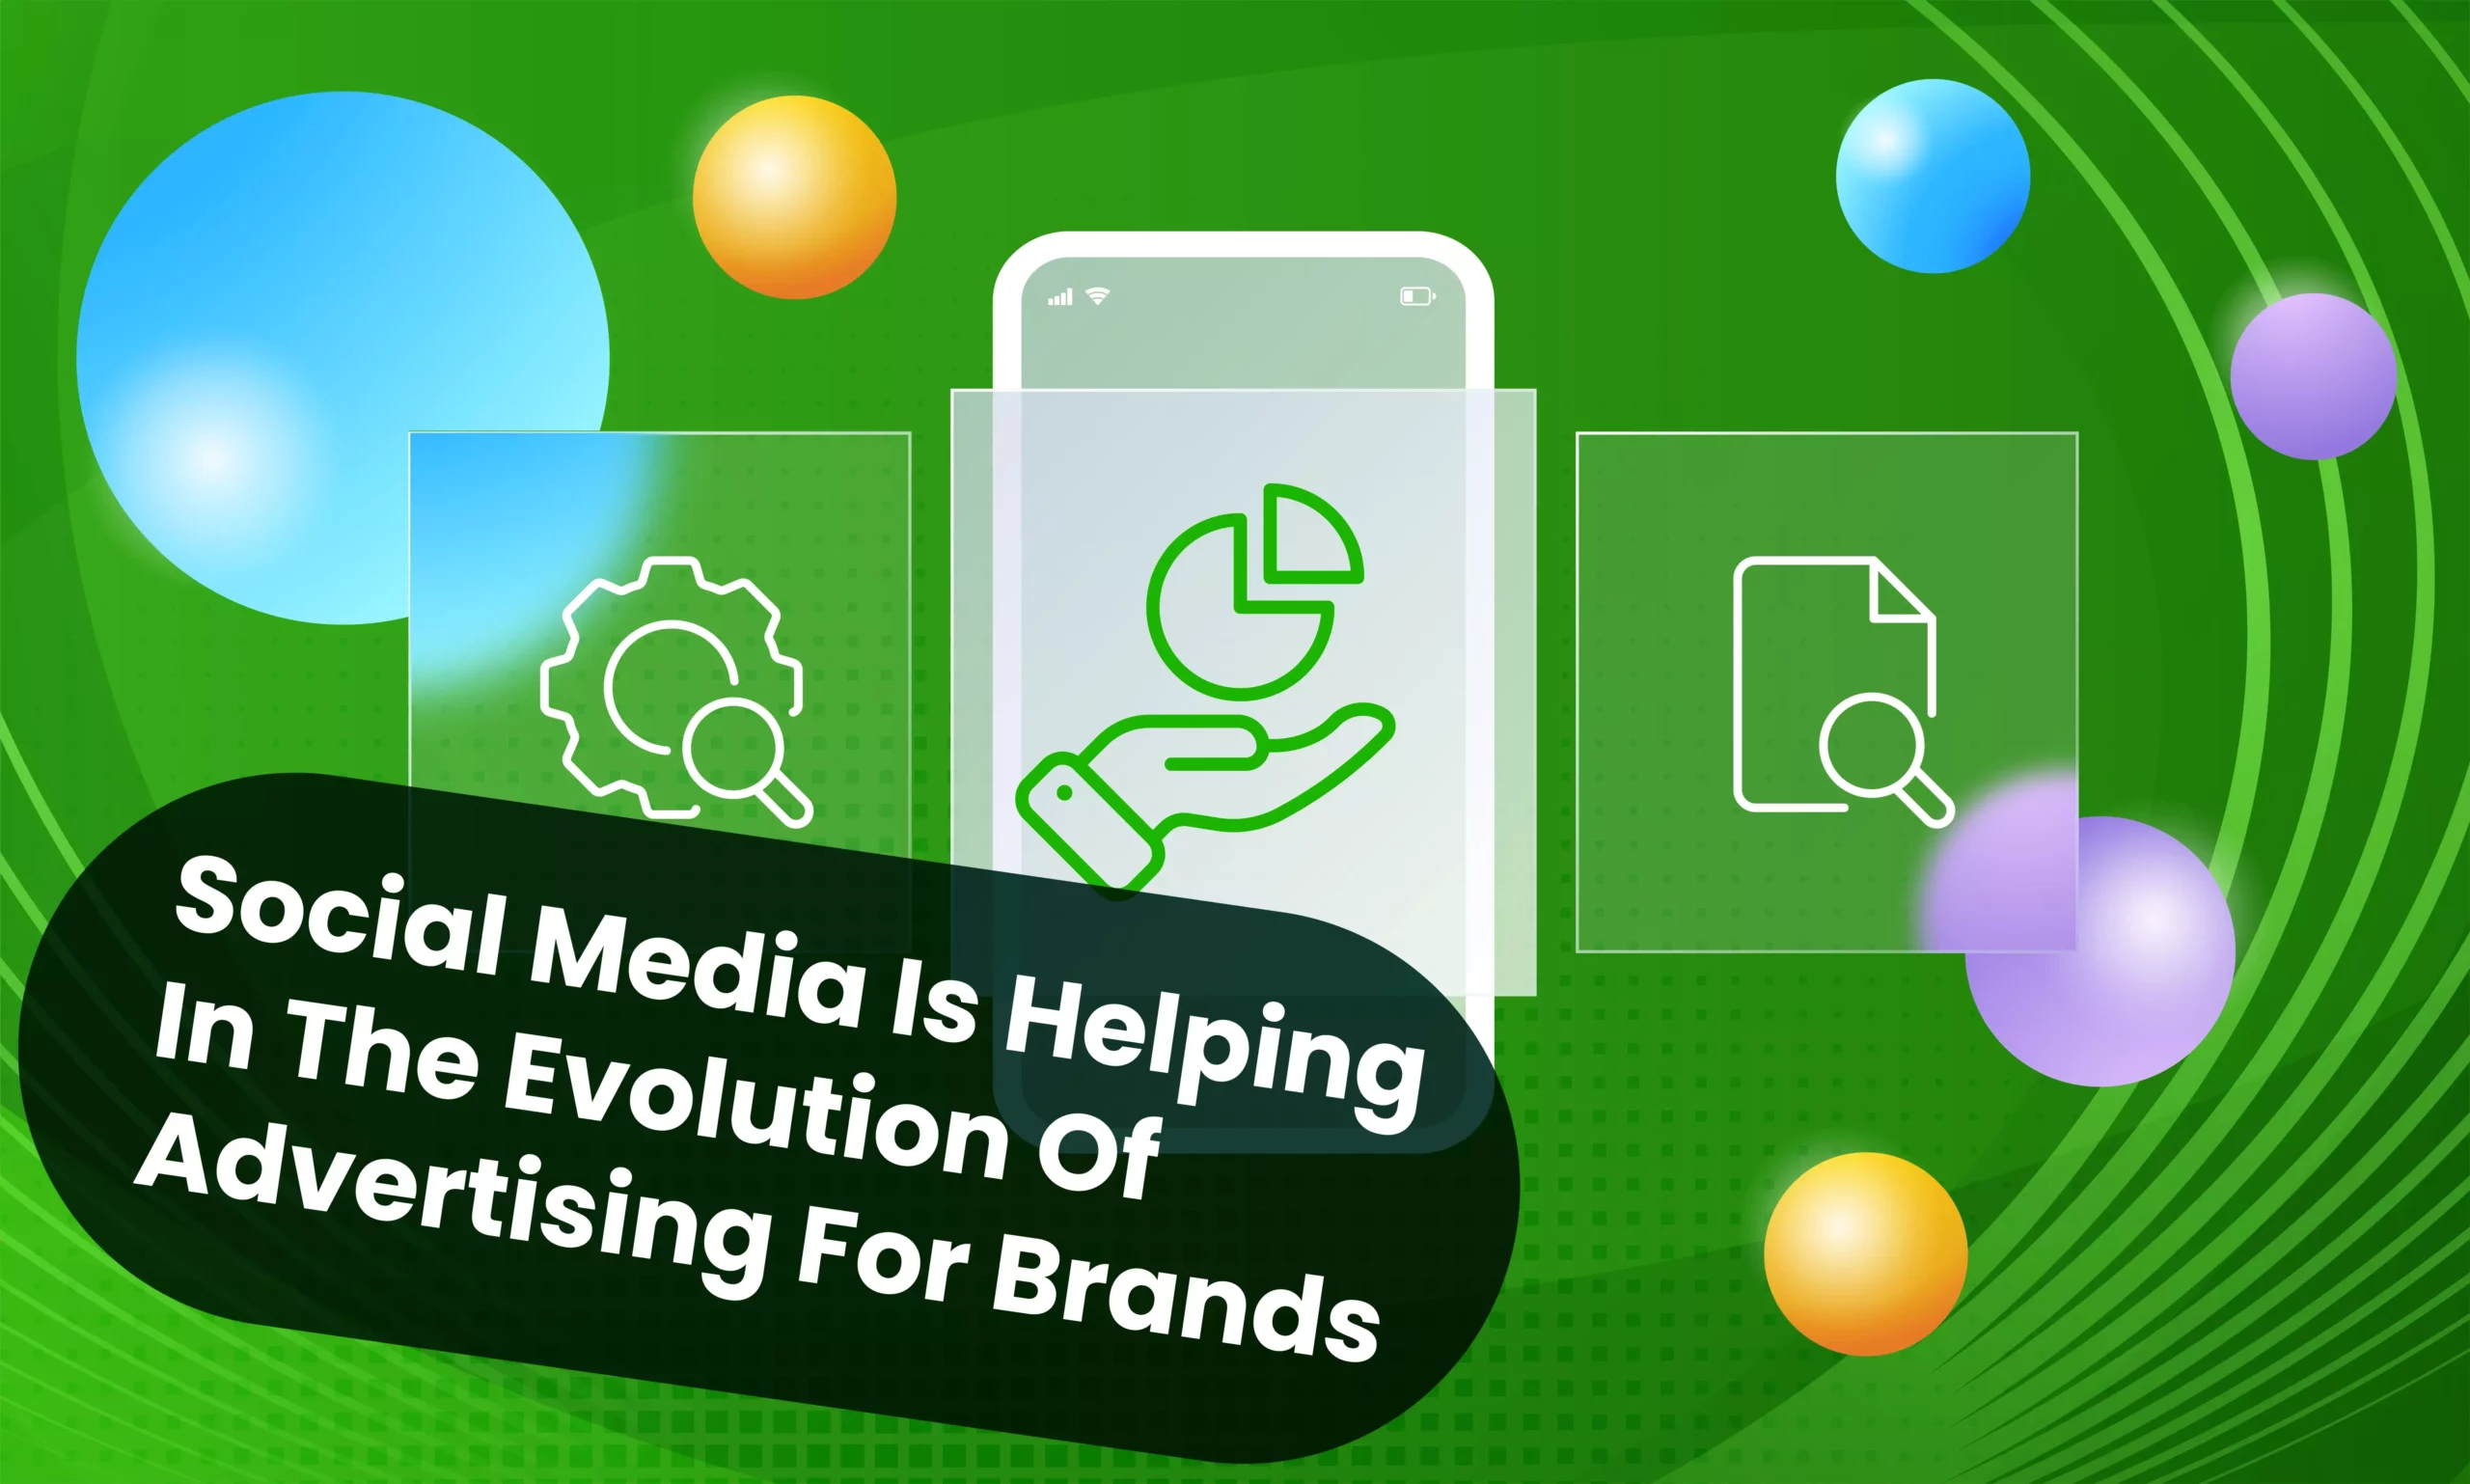 How Social Media Is Helping In The Evolution Of Advertising For Brands?